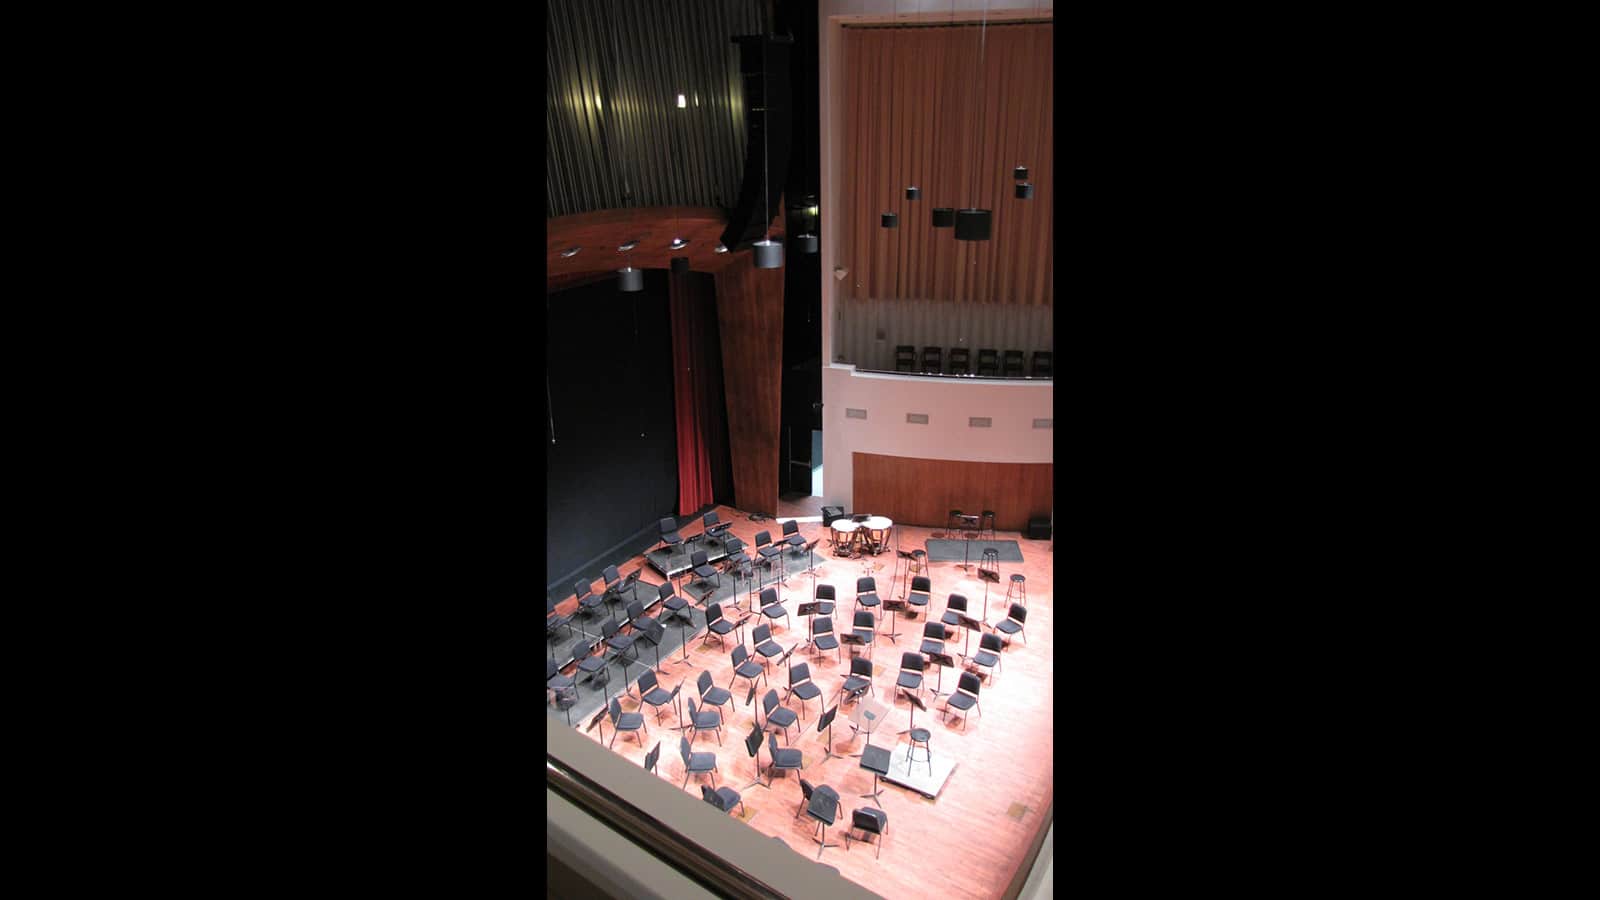 Meyer Sound Constellation at Cohan Center Facilitates Communication for Musicians